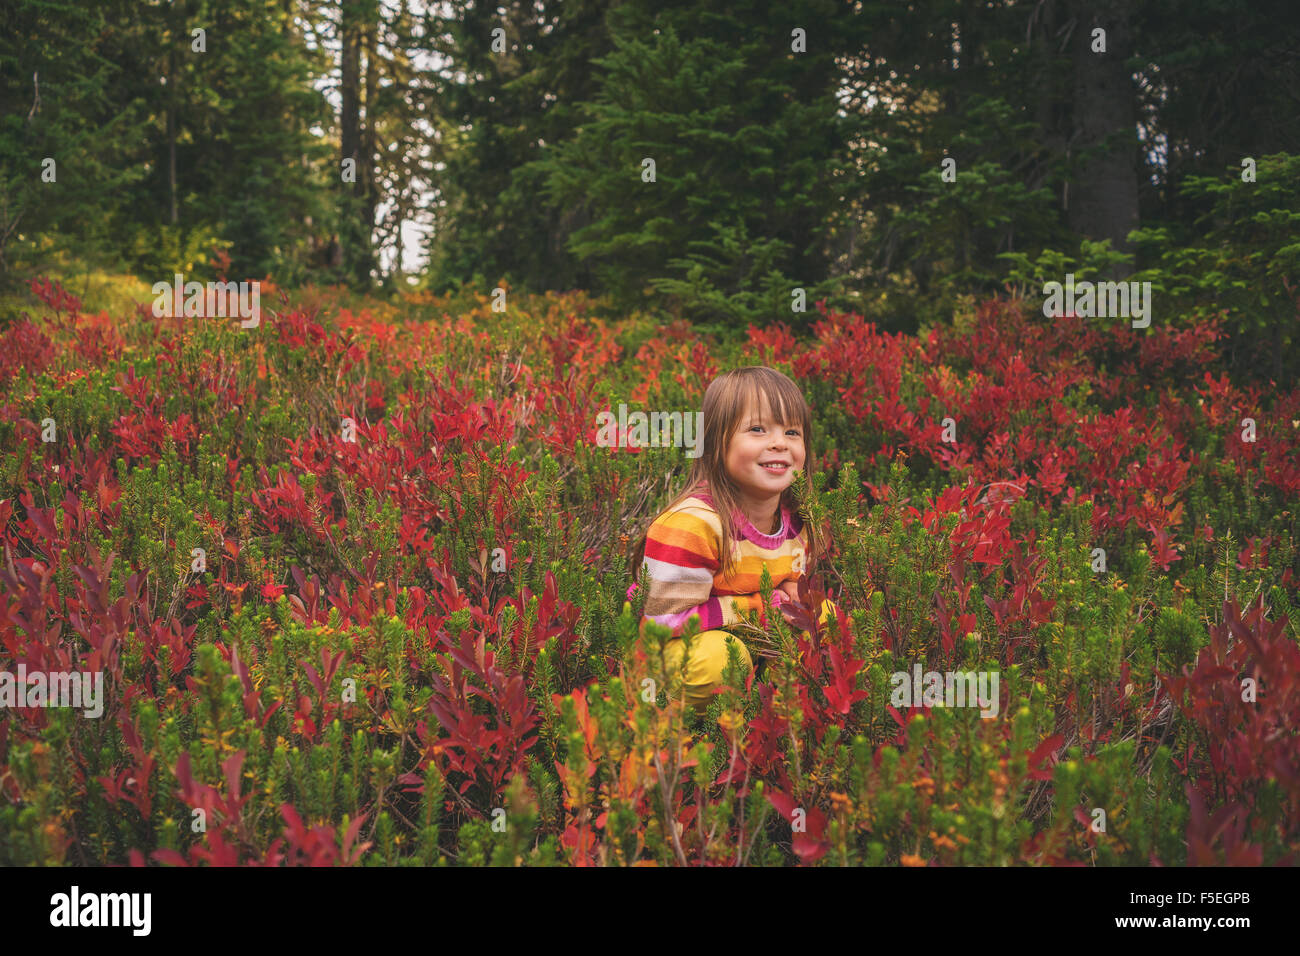 Smiling girl in a field of flowers Stock Photo